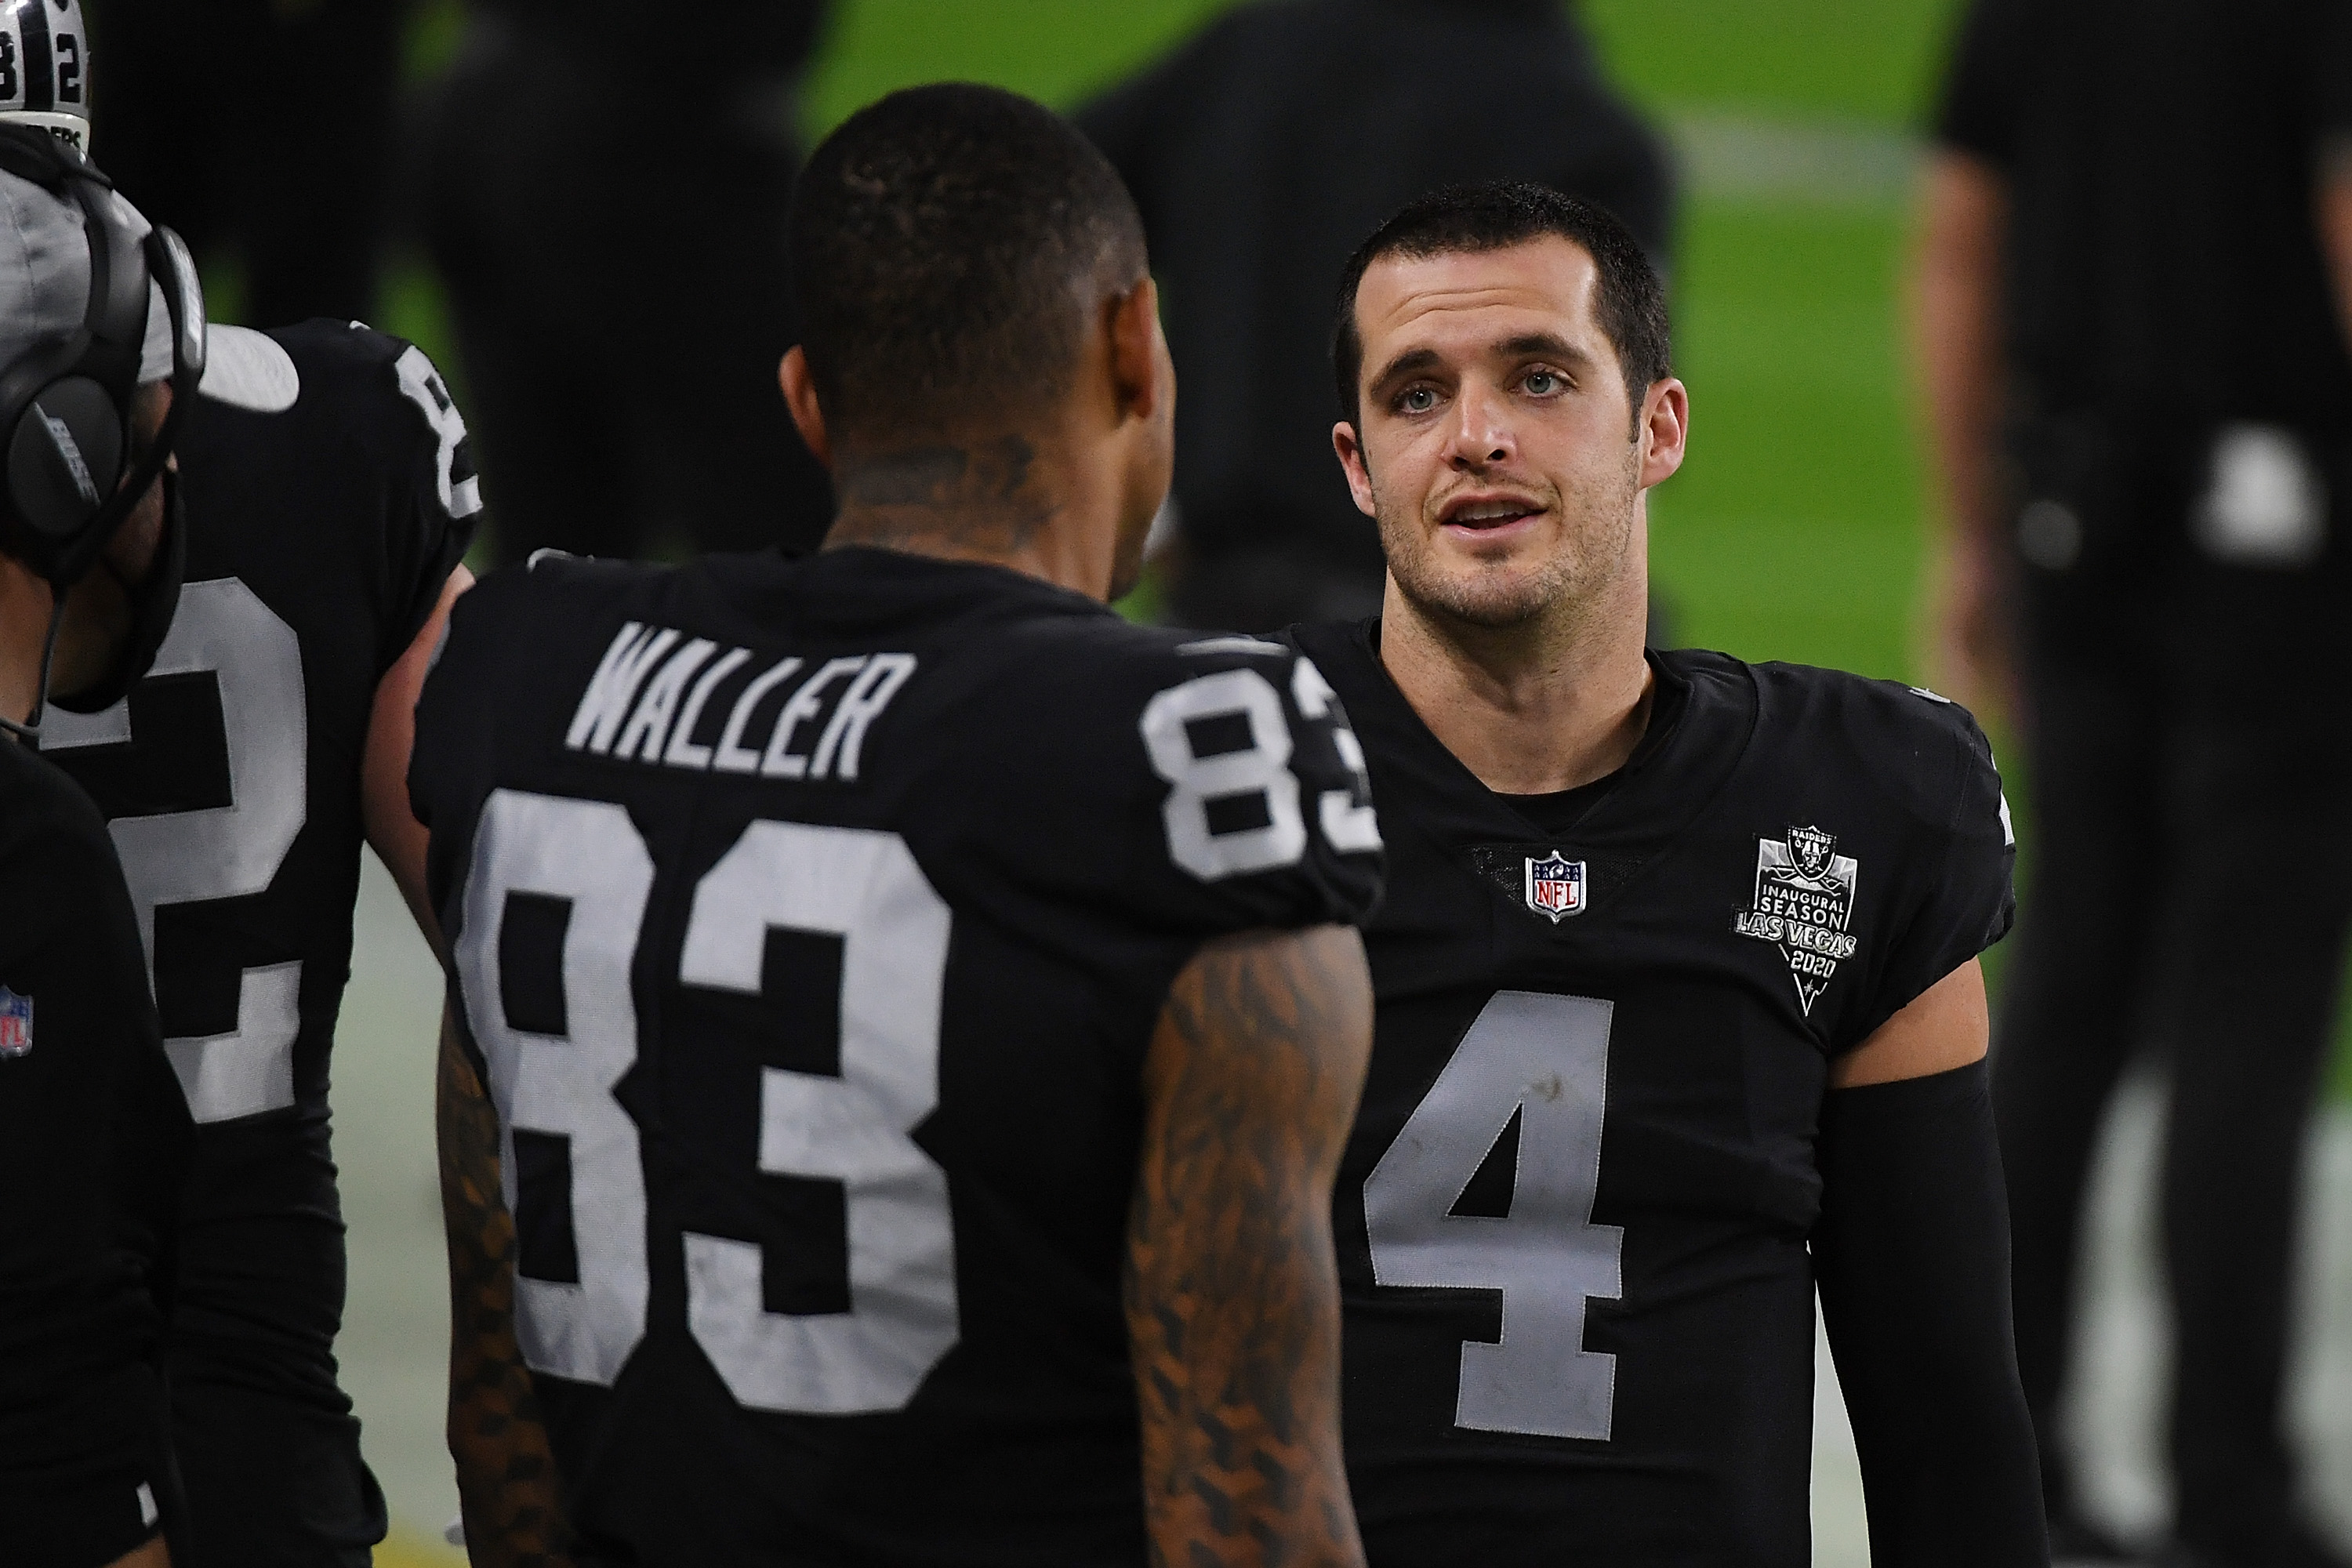 Raiders teammates Darren Waller and Derek Carr talking on the sideline during a game